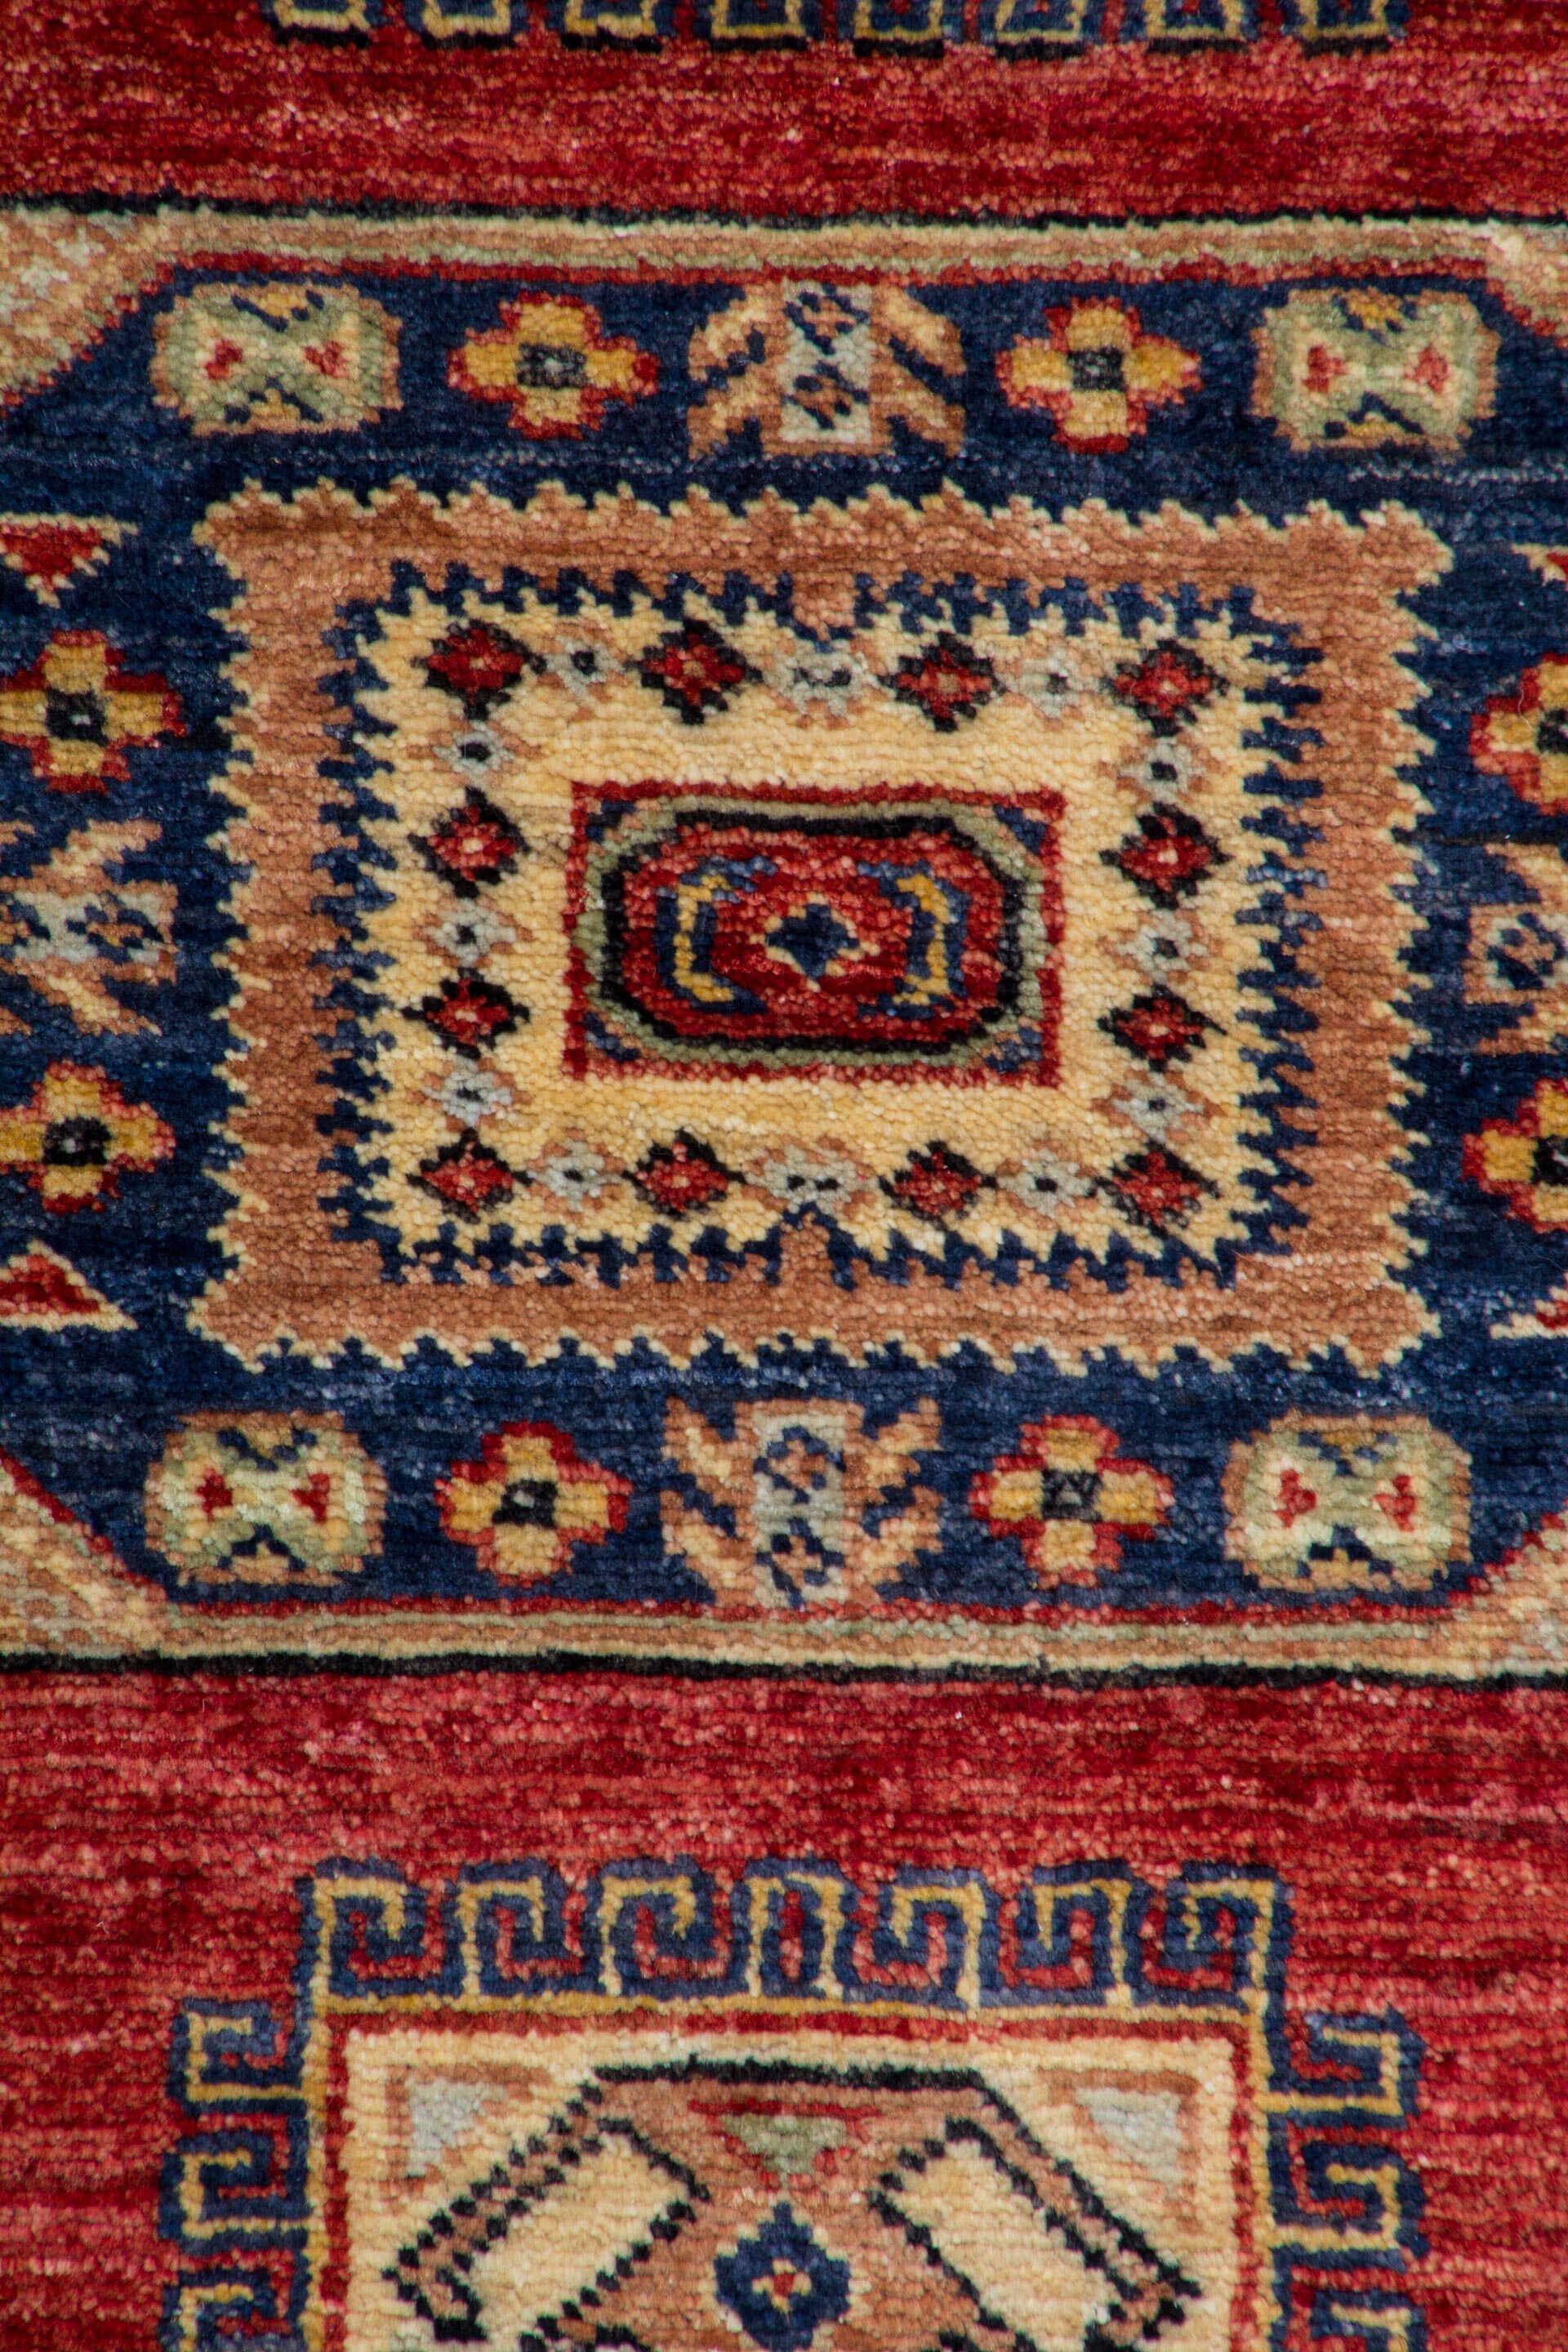 Hand Knotted Afghanistan Kazak Wool 100% 3'3" x 5' Red